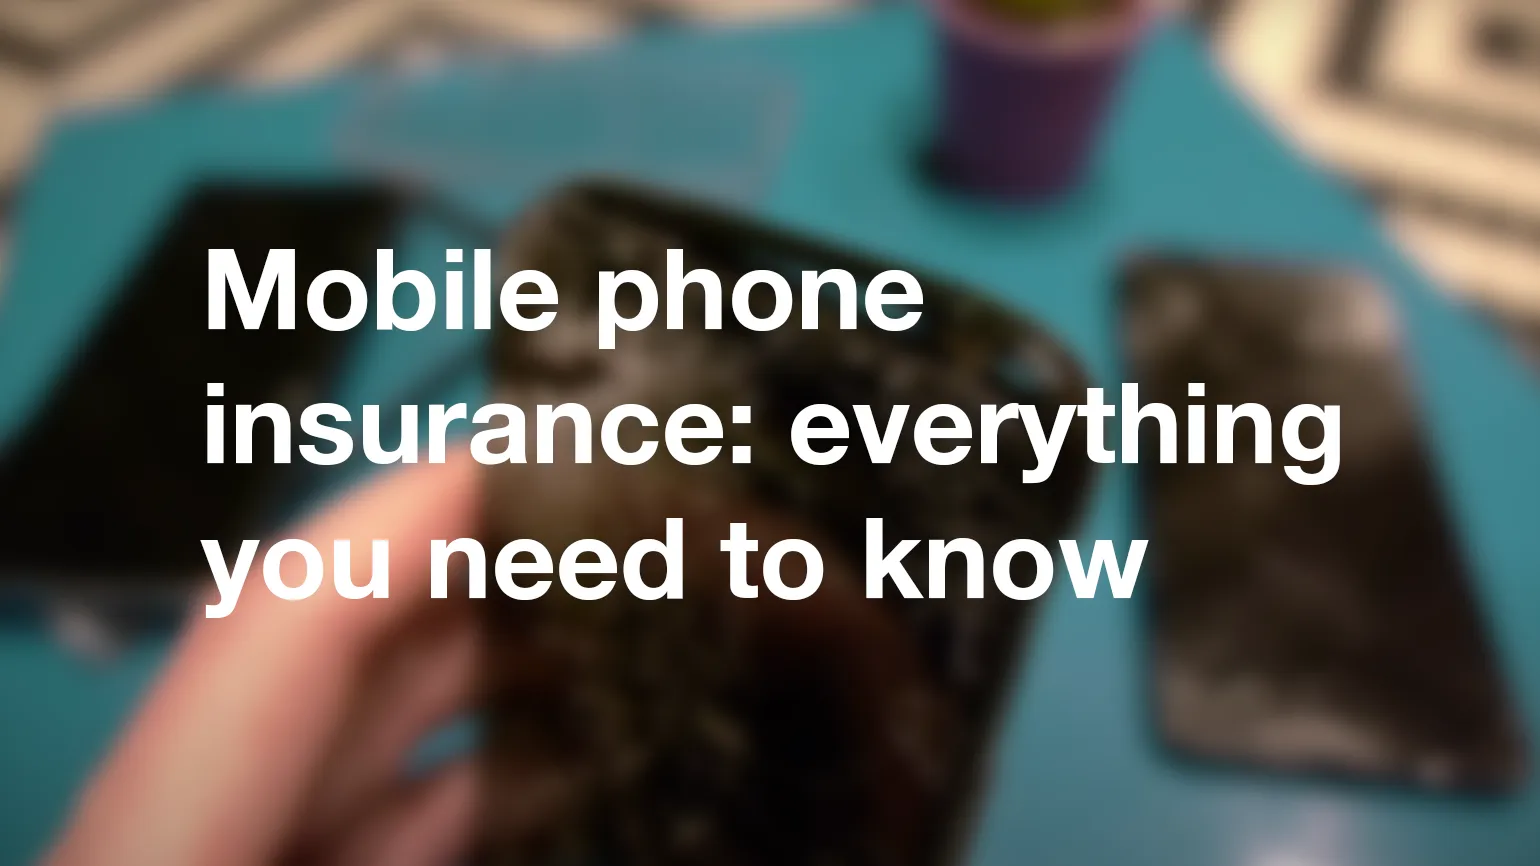 Mobile phone insurance: everything you need to know